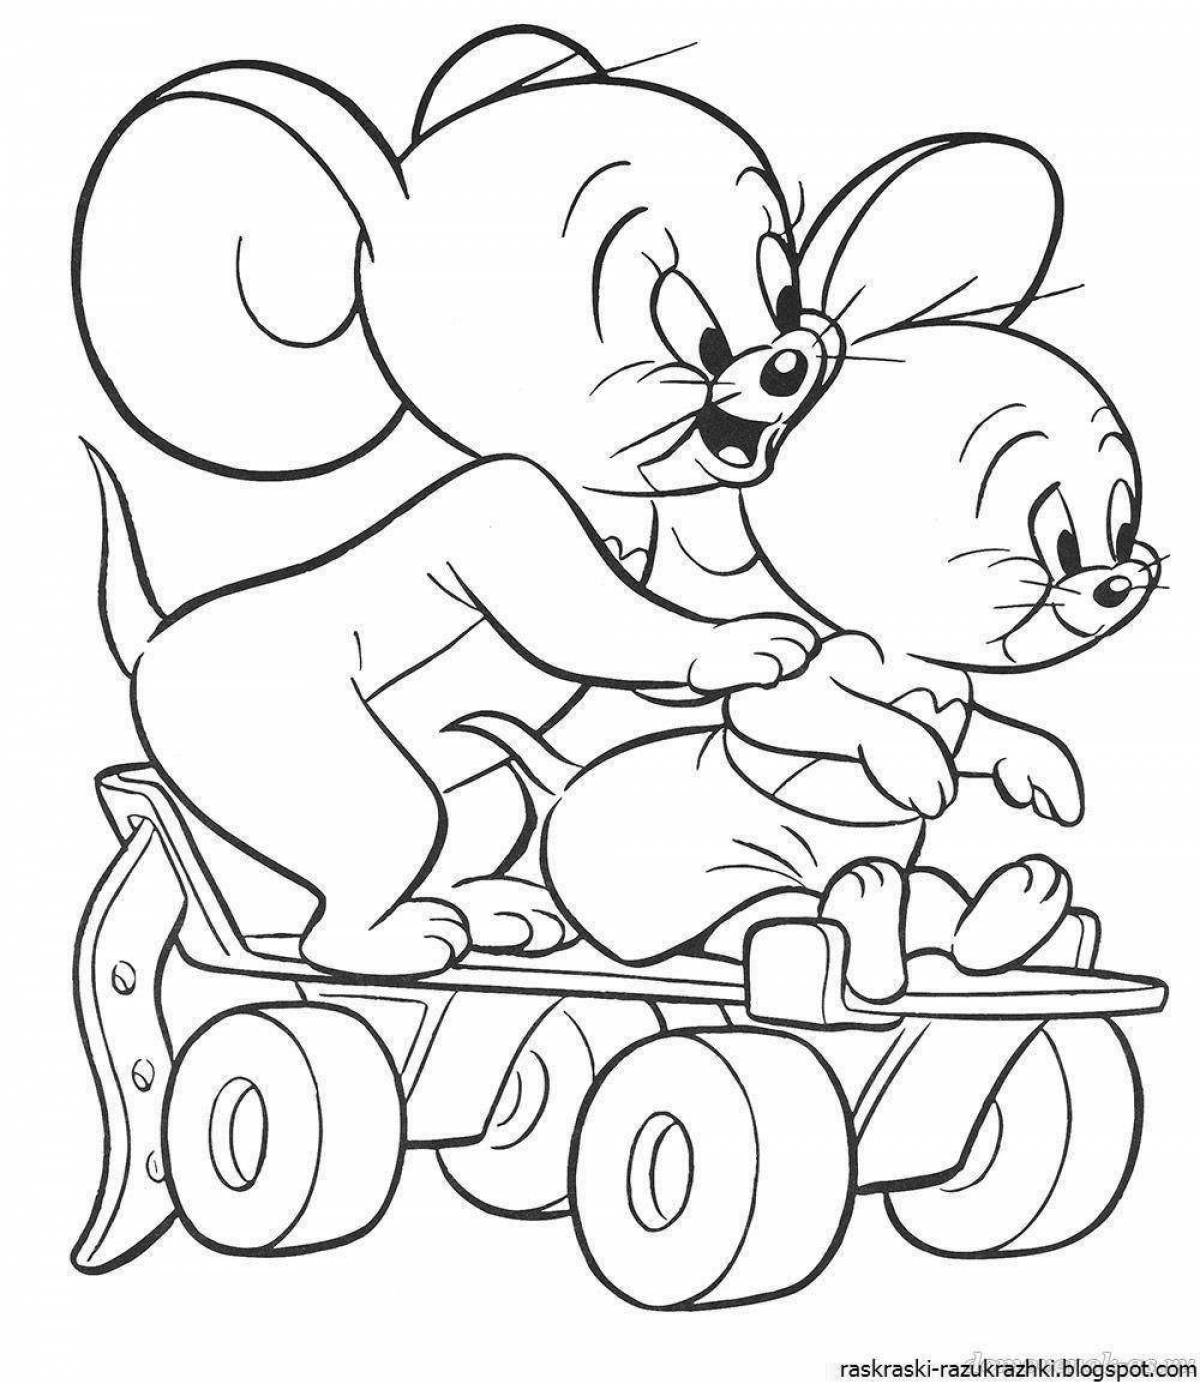 A fascinating coloring game playing ru for children 6-7 years old